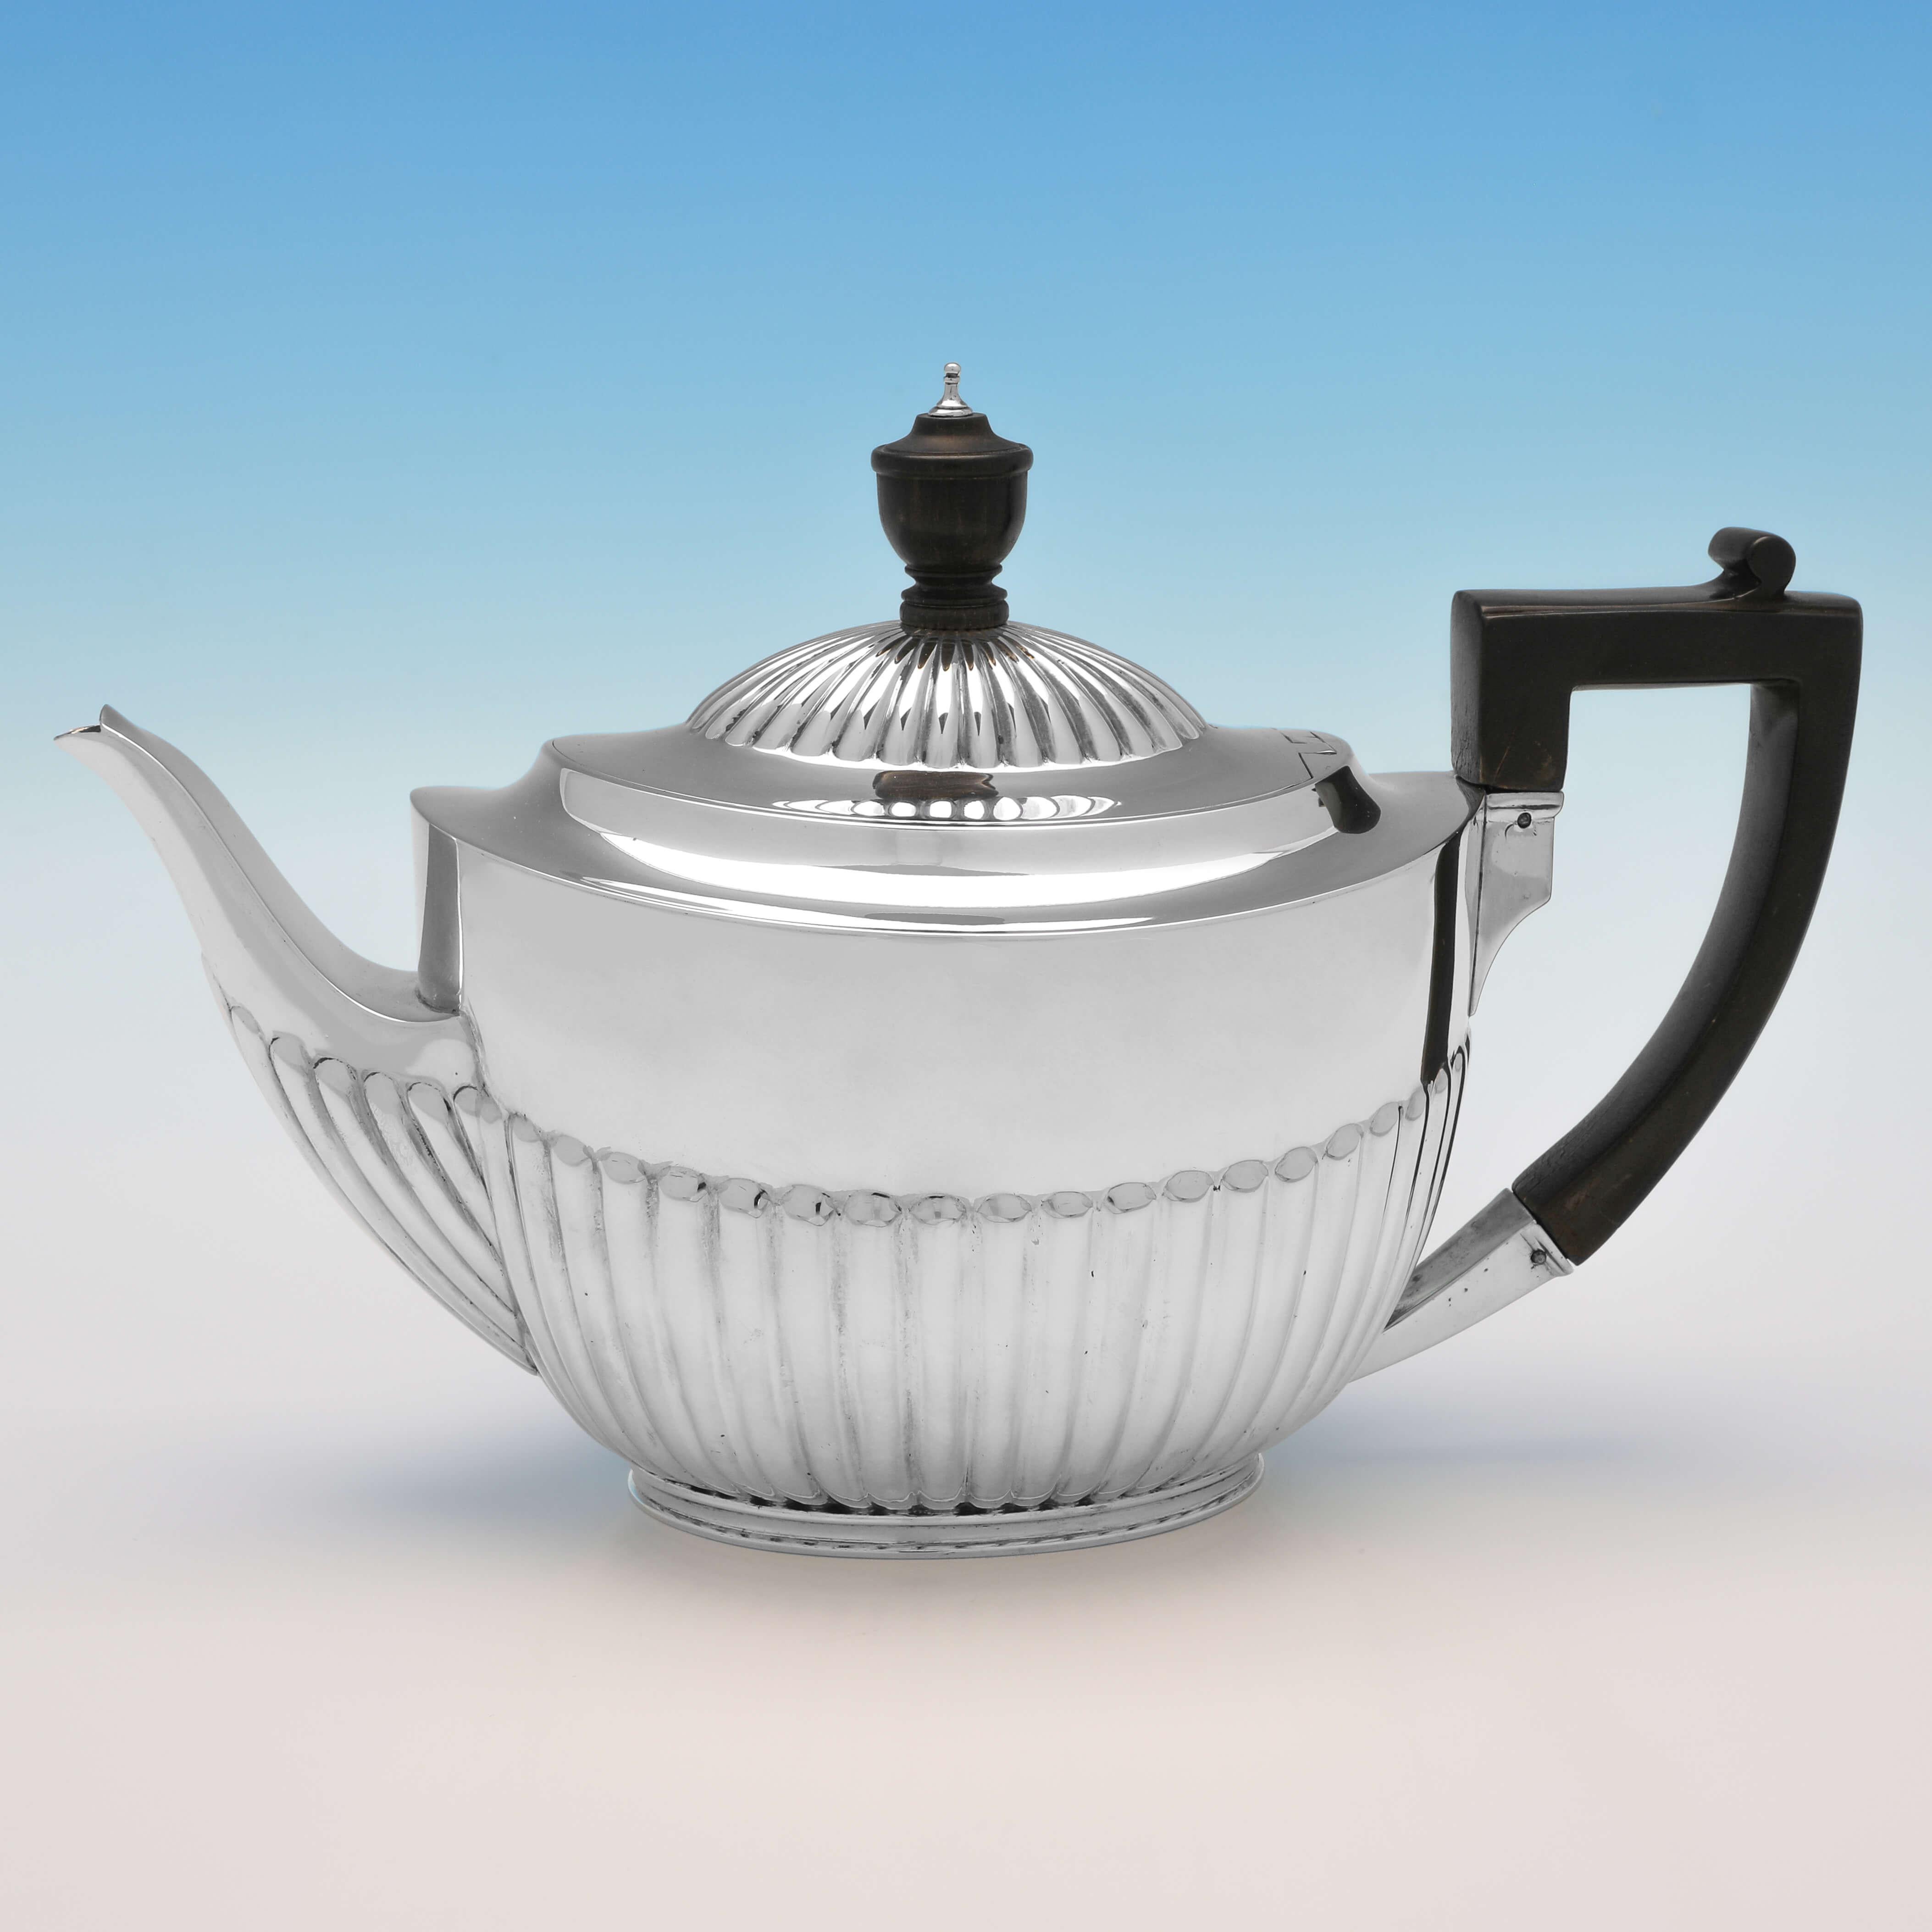 Hallmarked in London in 1883/1884 by Barnards, this stylish, Antique Sterling Silver 4 Piece Tea Set, is in the classic 'Queen Anne' style, featuring half fluting to the bodies of each piece. The teapot measures 6